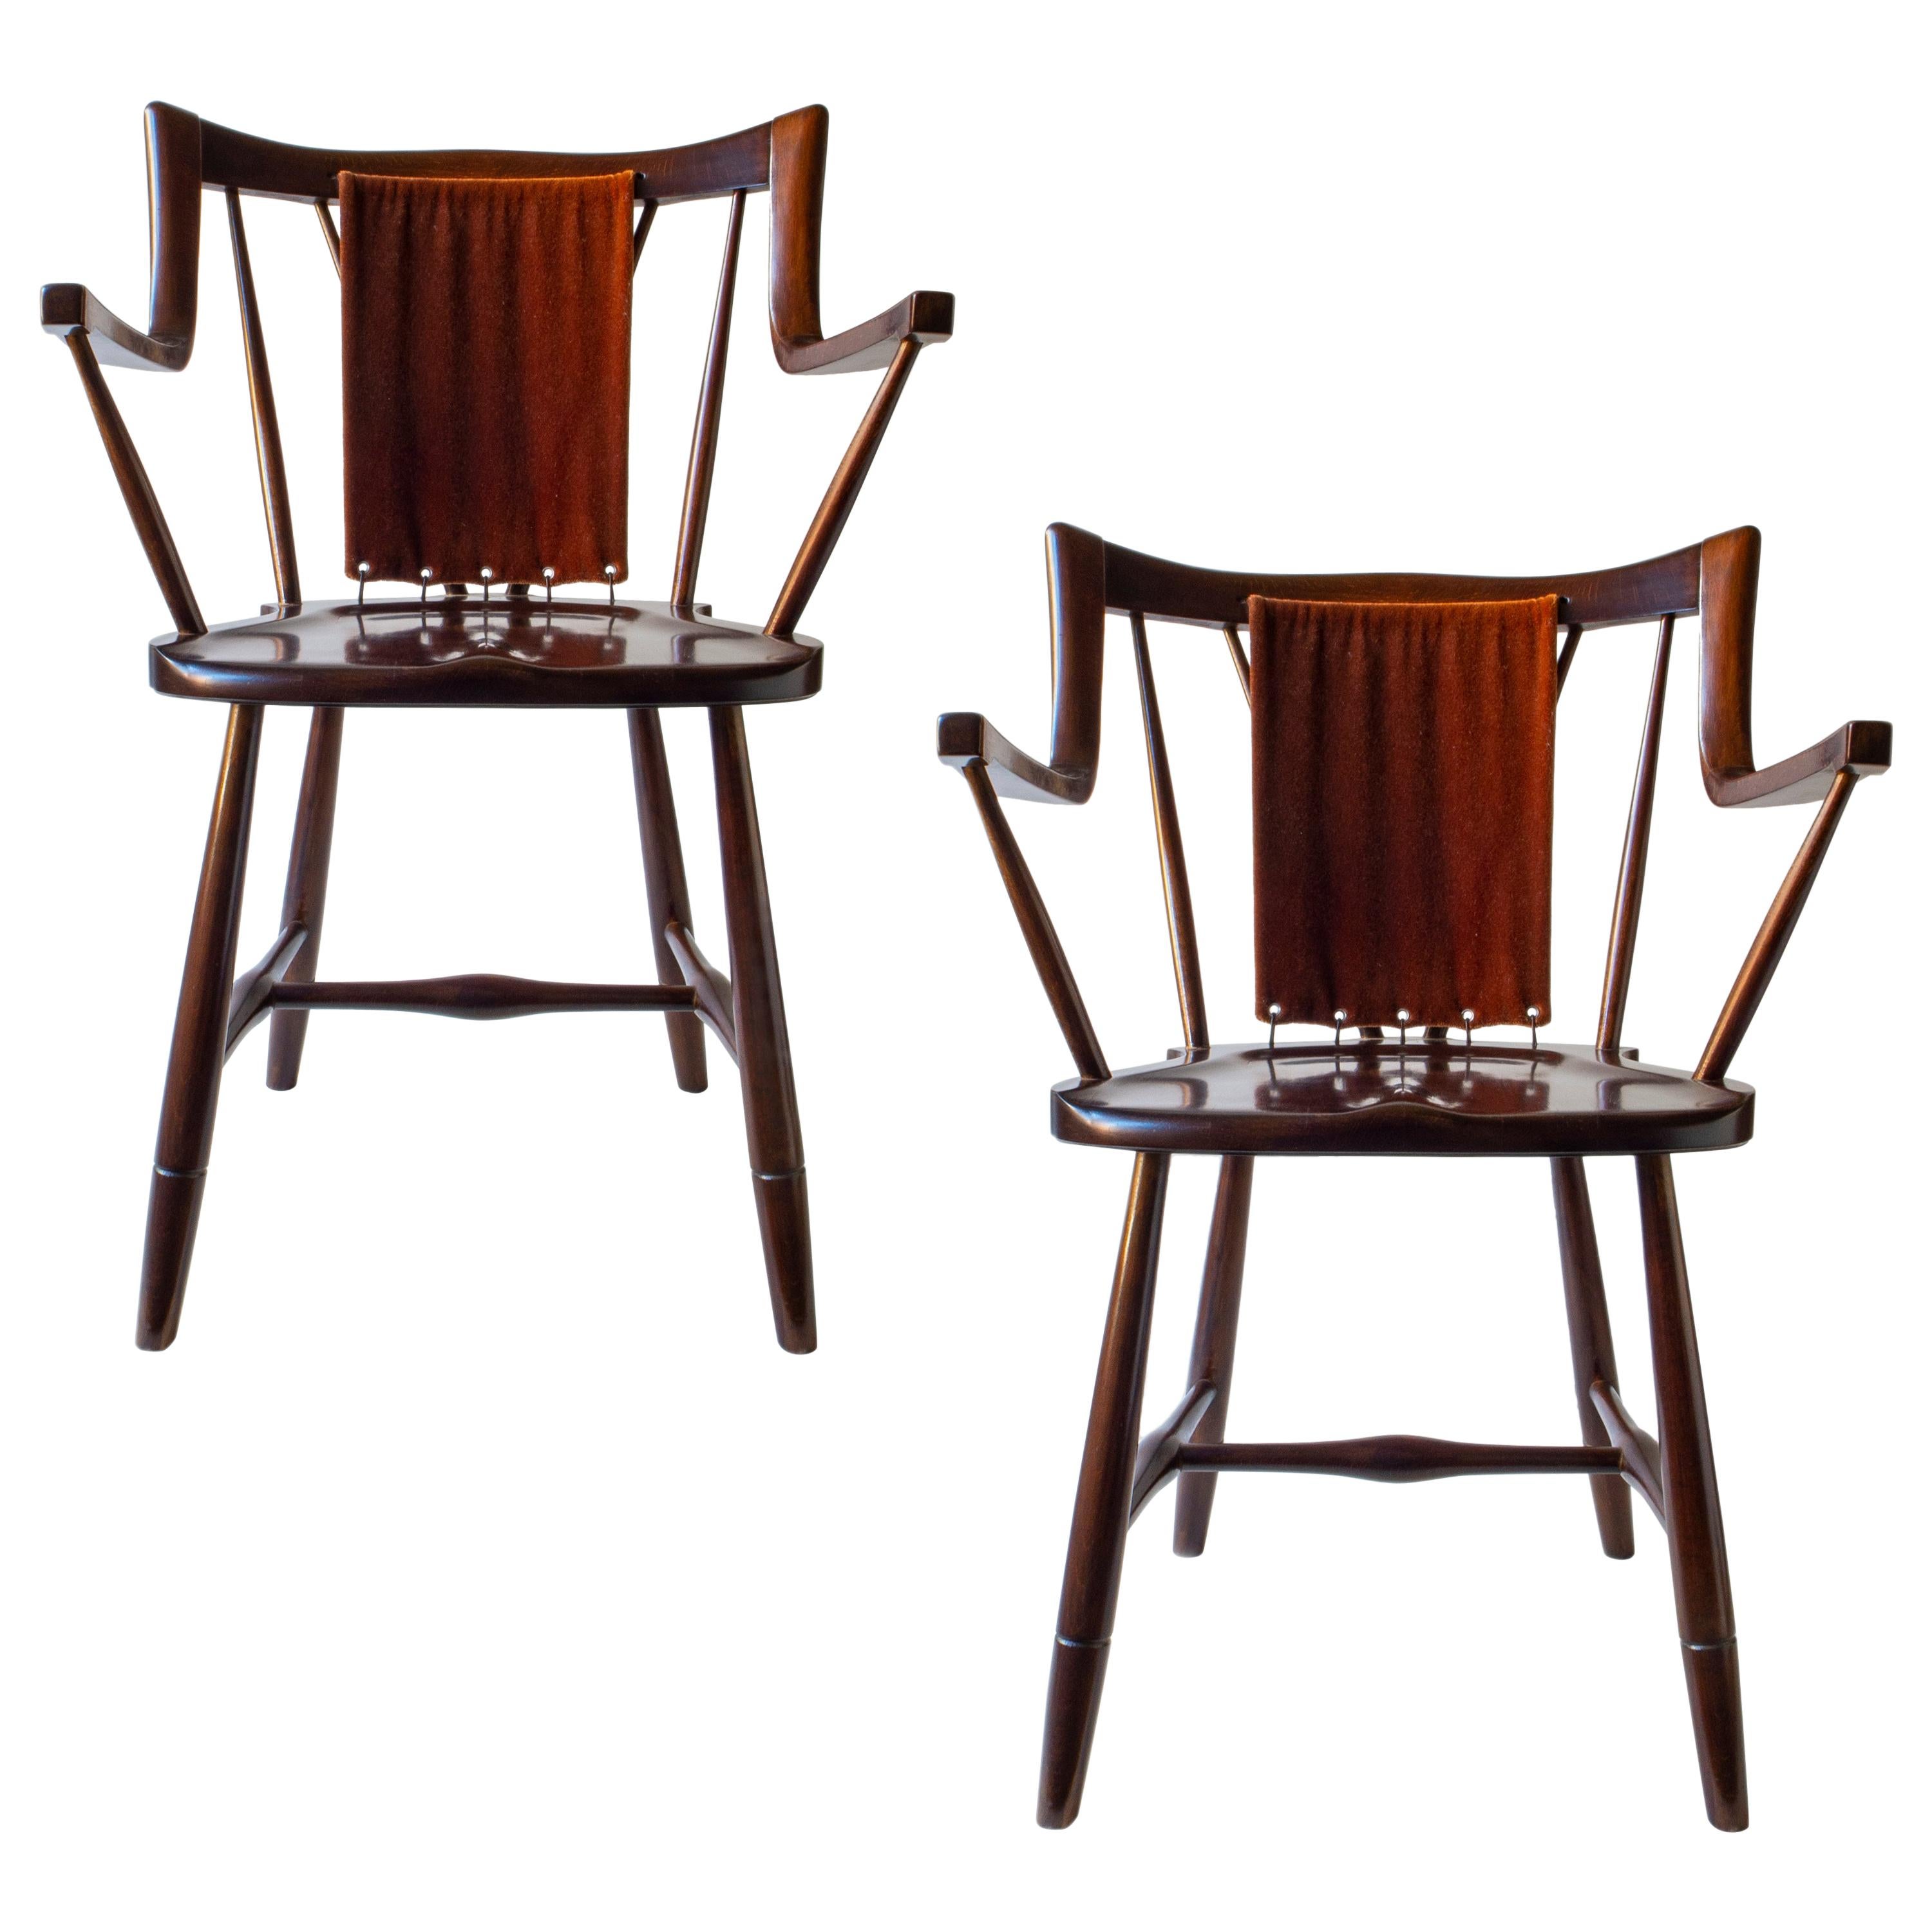 Eva & Nils Koppel, Pair of Danish Modern Stained Beech and Mohair Armchairs